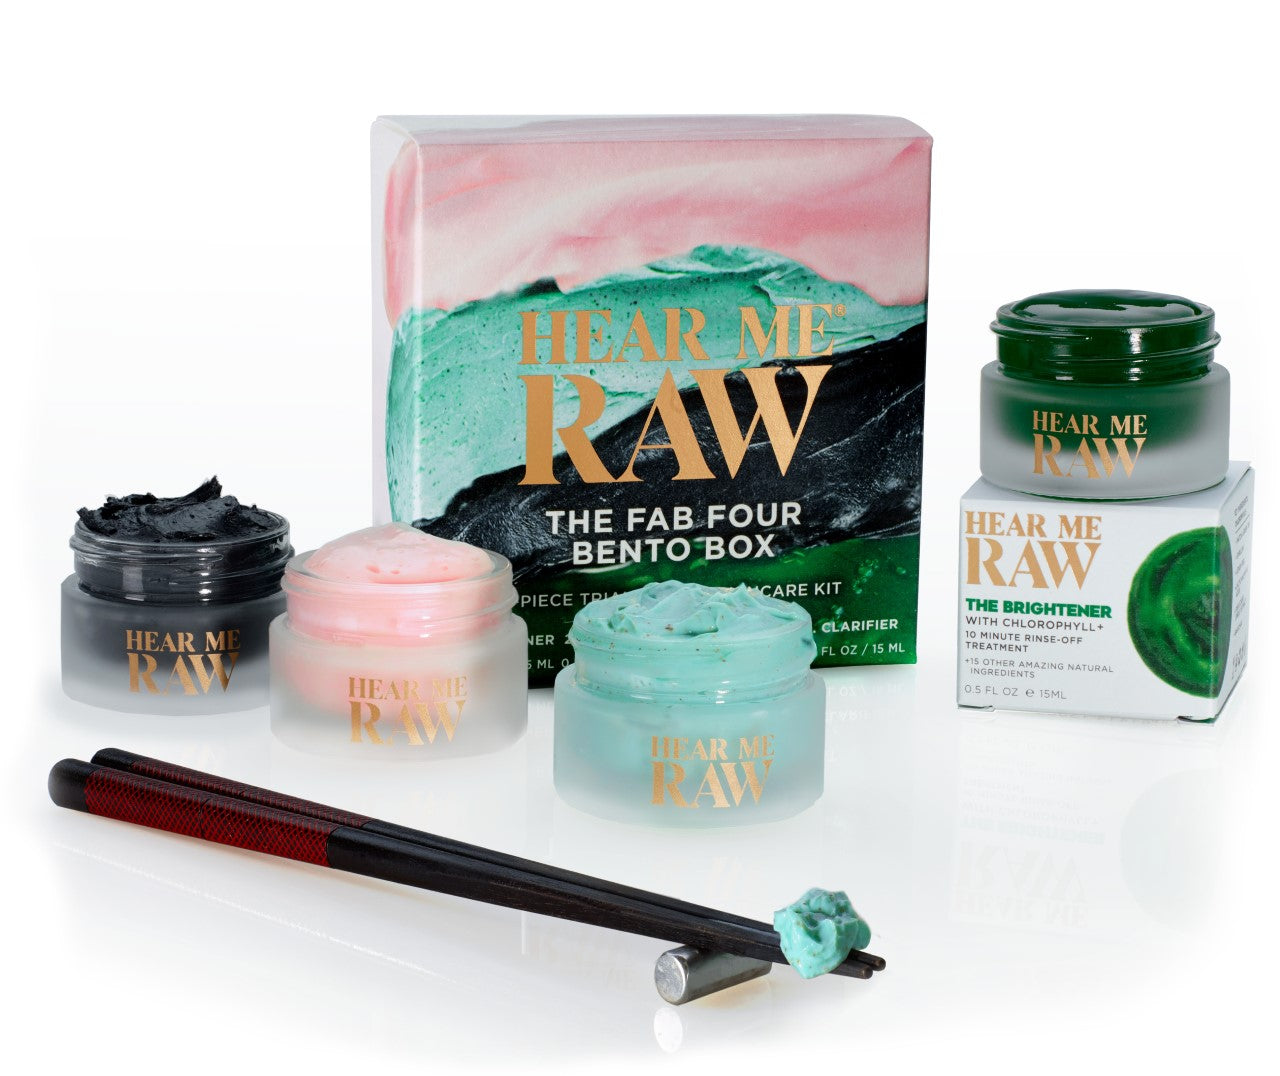  BENTO BOX - THE FAB FOUR by Hear Me Raw Skincare Products Hear Me Raw Skincare Products Perfumarie